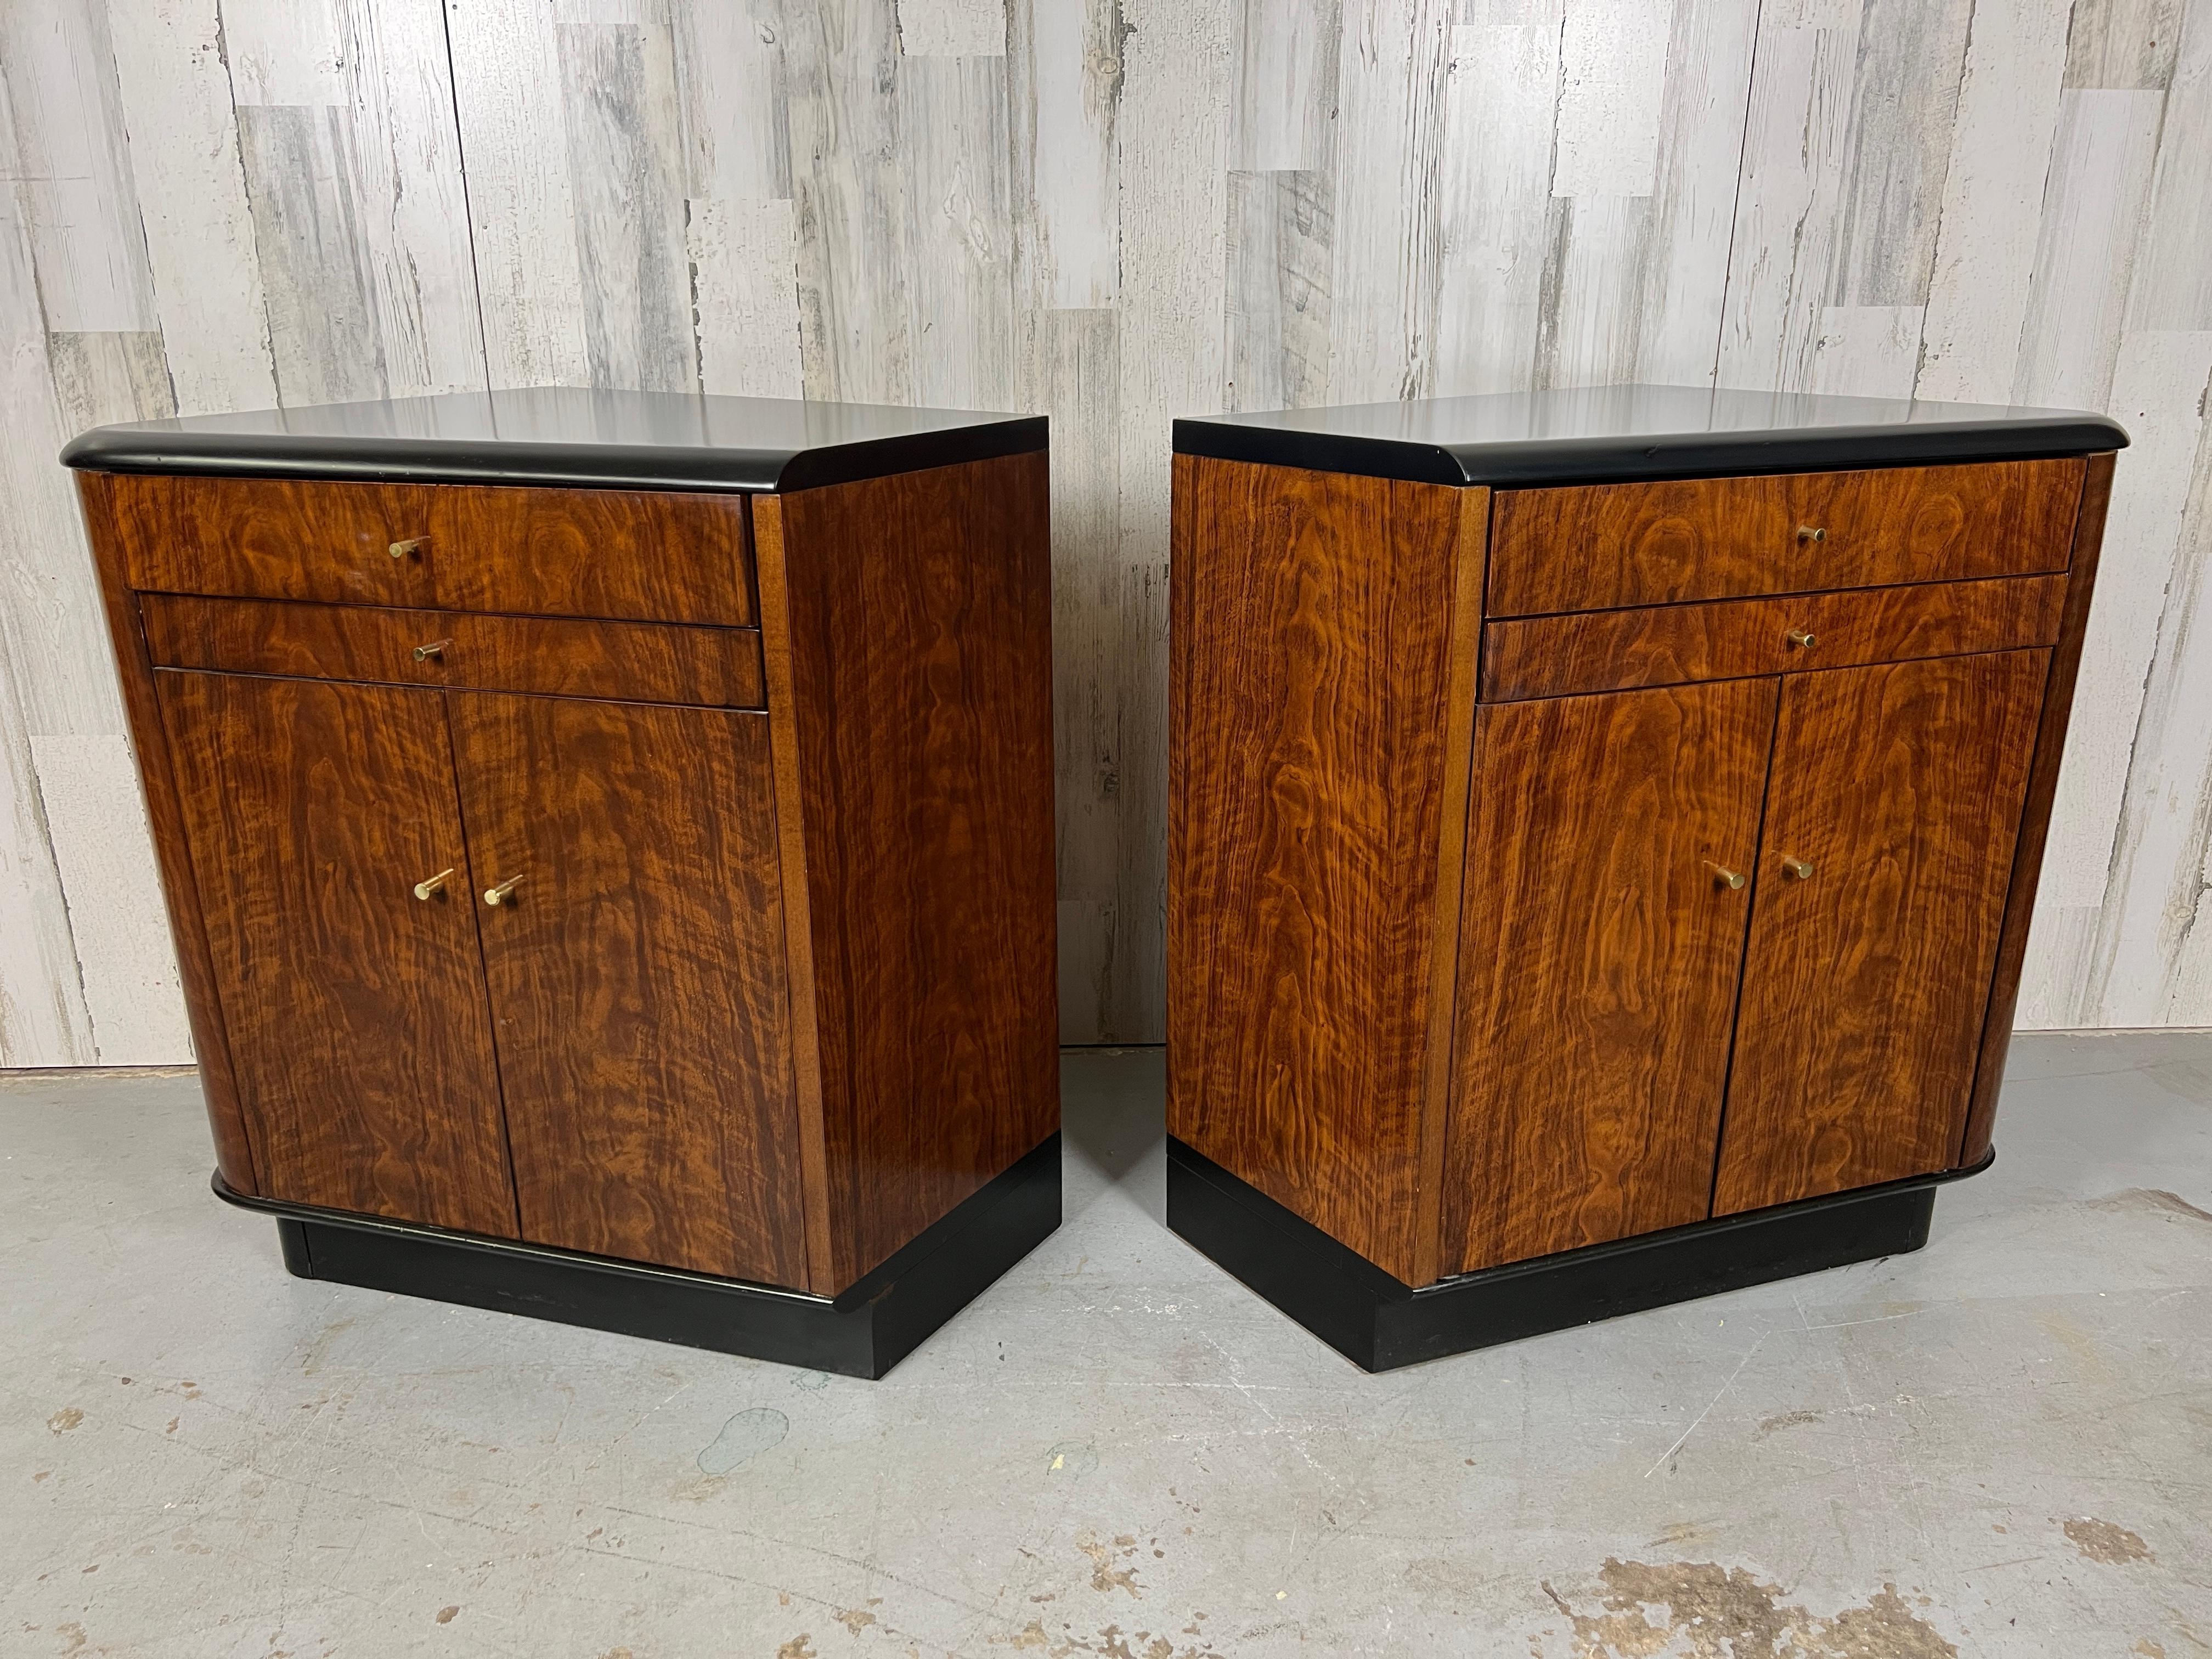 Walnut with sculpted grain and black lacquer accents make these nightstands very dramatic. With storage below and a drink shelf for nightcaps. The drink shelves are different on each side please see pictures.